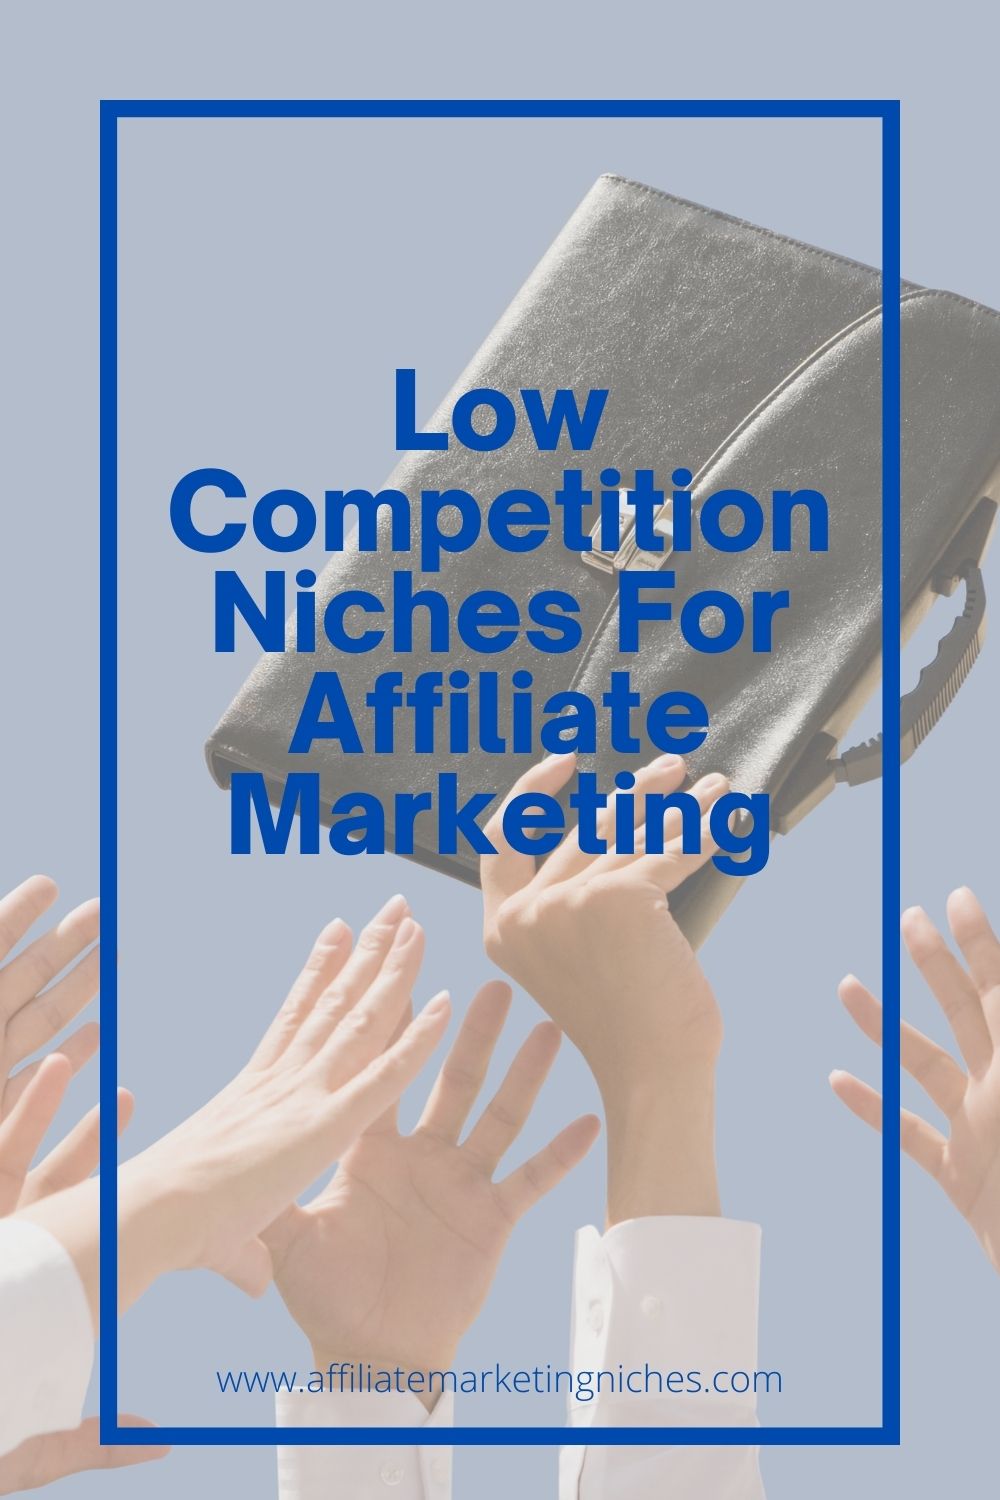 Affiliate Marketing Niches With Low Competition